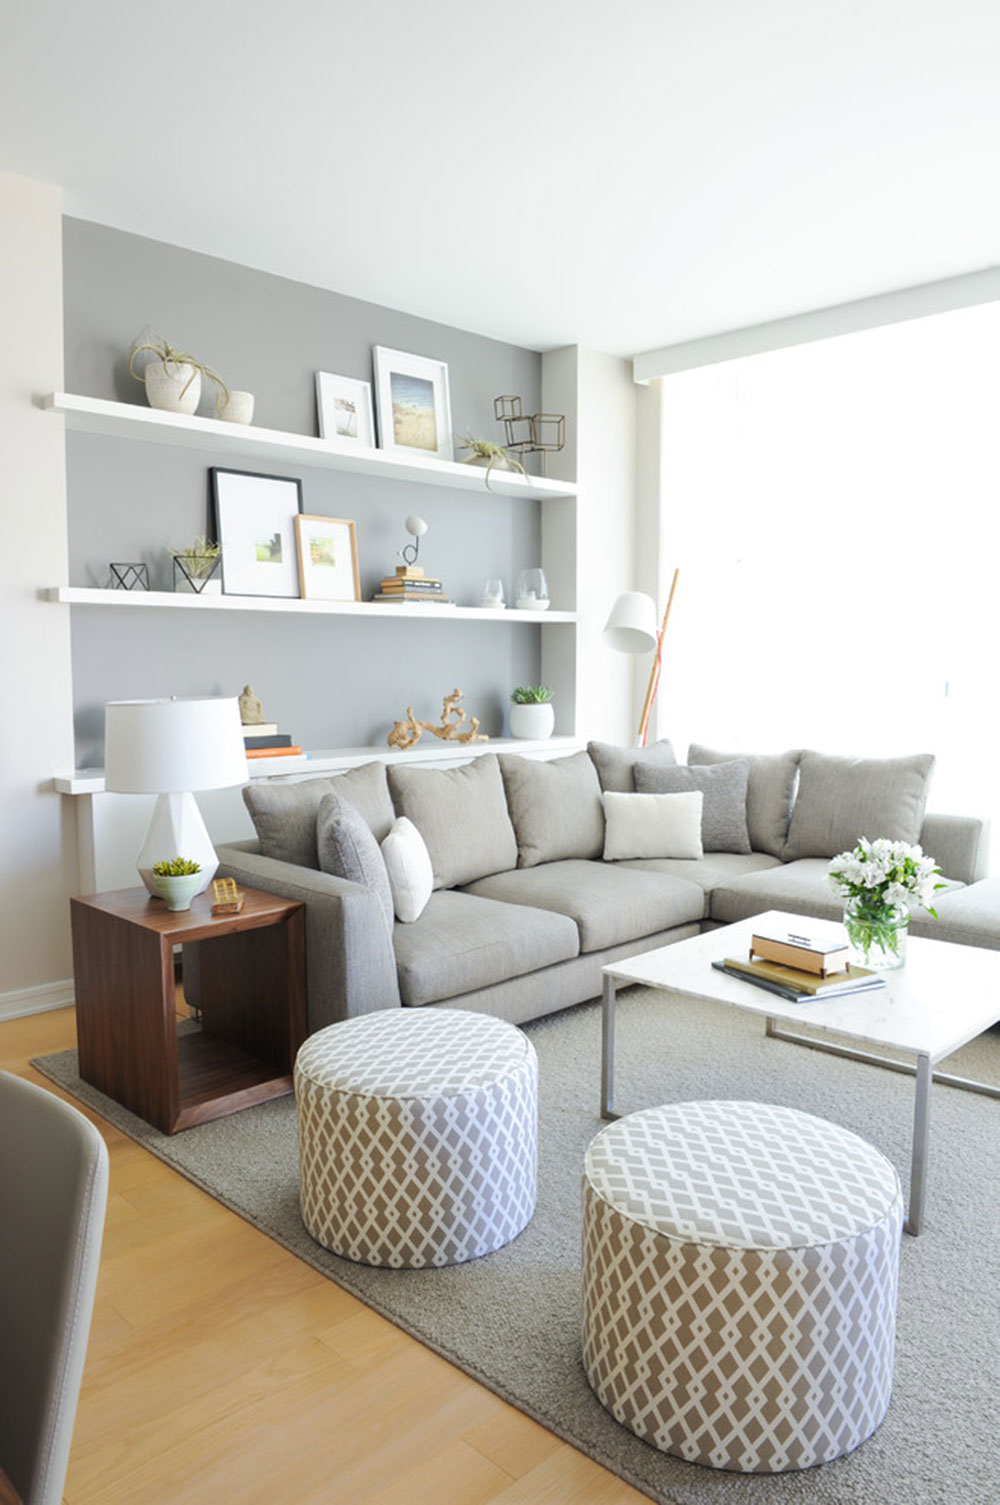 FALSE-CREEK-CONDO-by-SHIFT-Interiors How to arrange furniture in an awkward living room